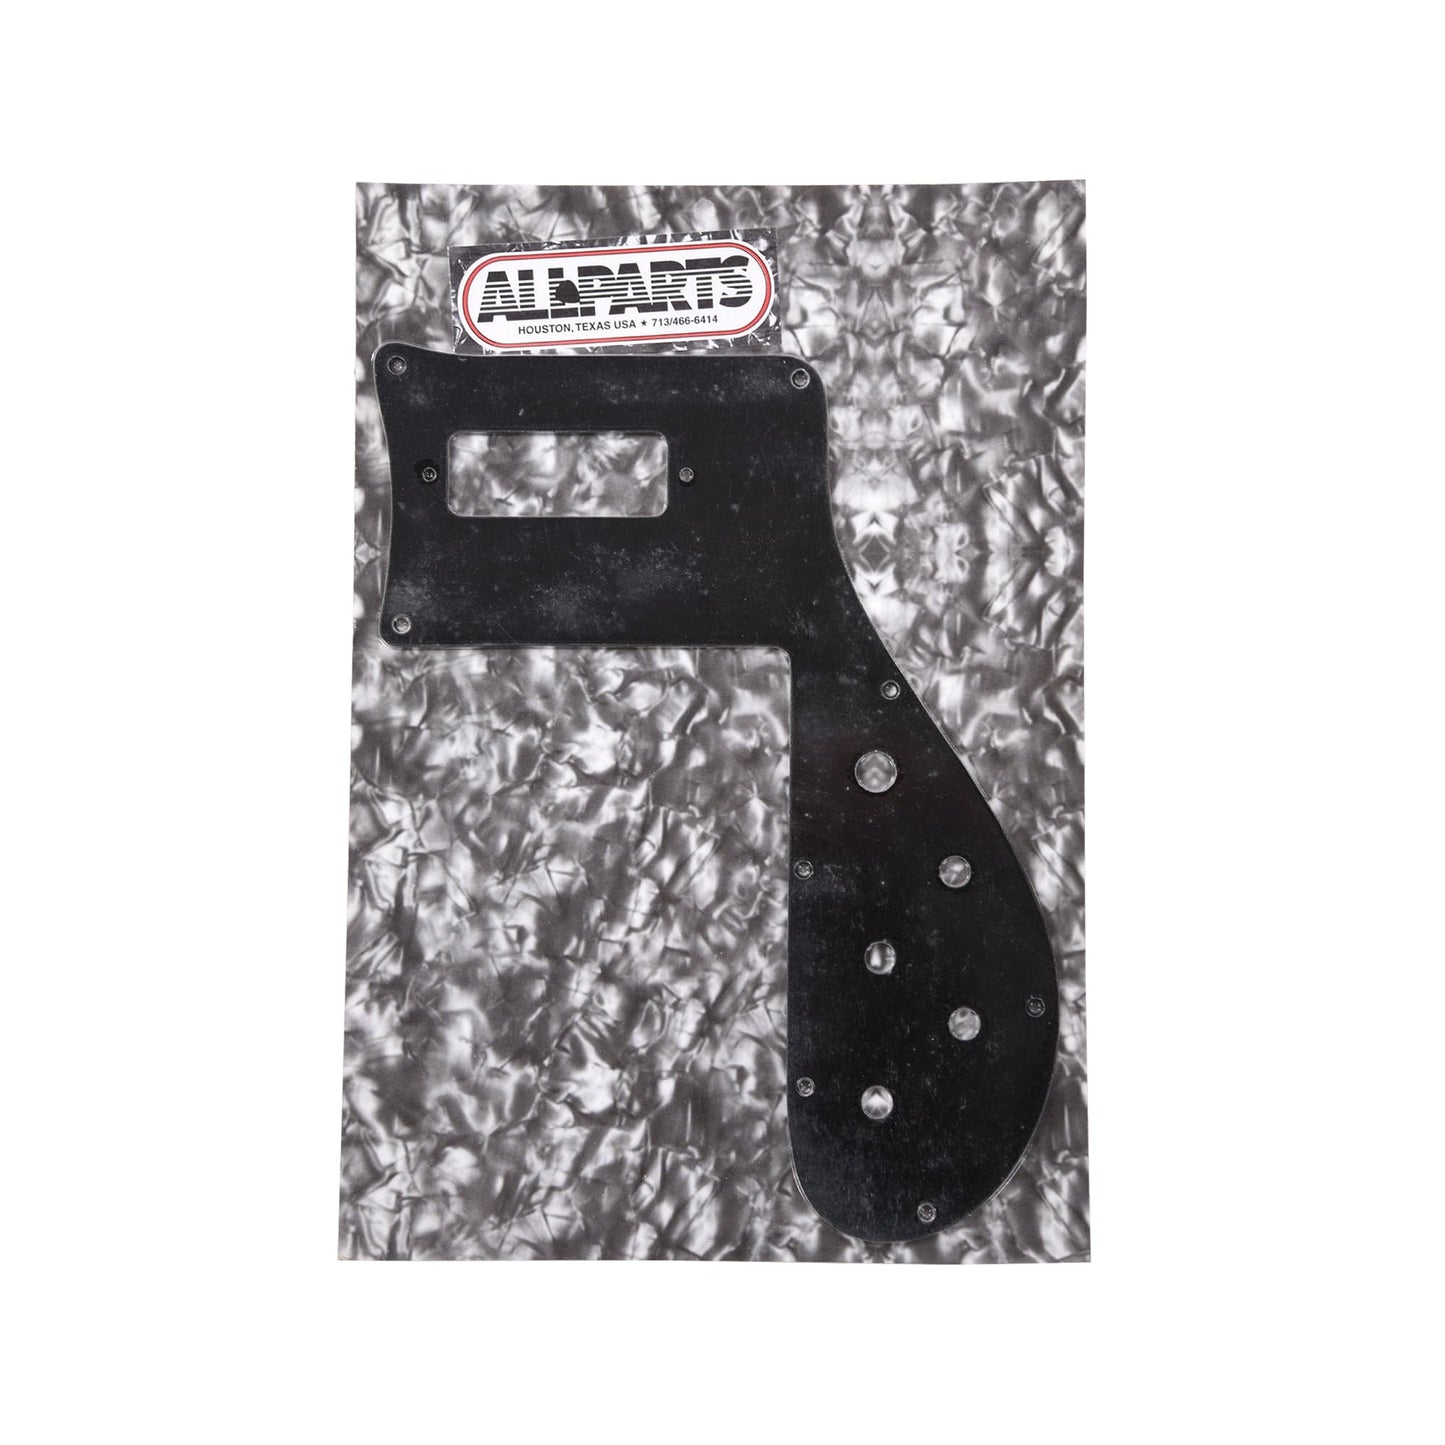 Allparts Pickguard for Rickenbacker Bass 4001 1974 or Later 1-Piece 1-Ply Black Parts / Pickguards